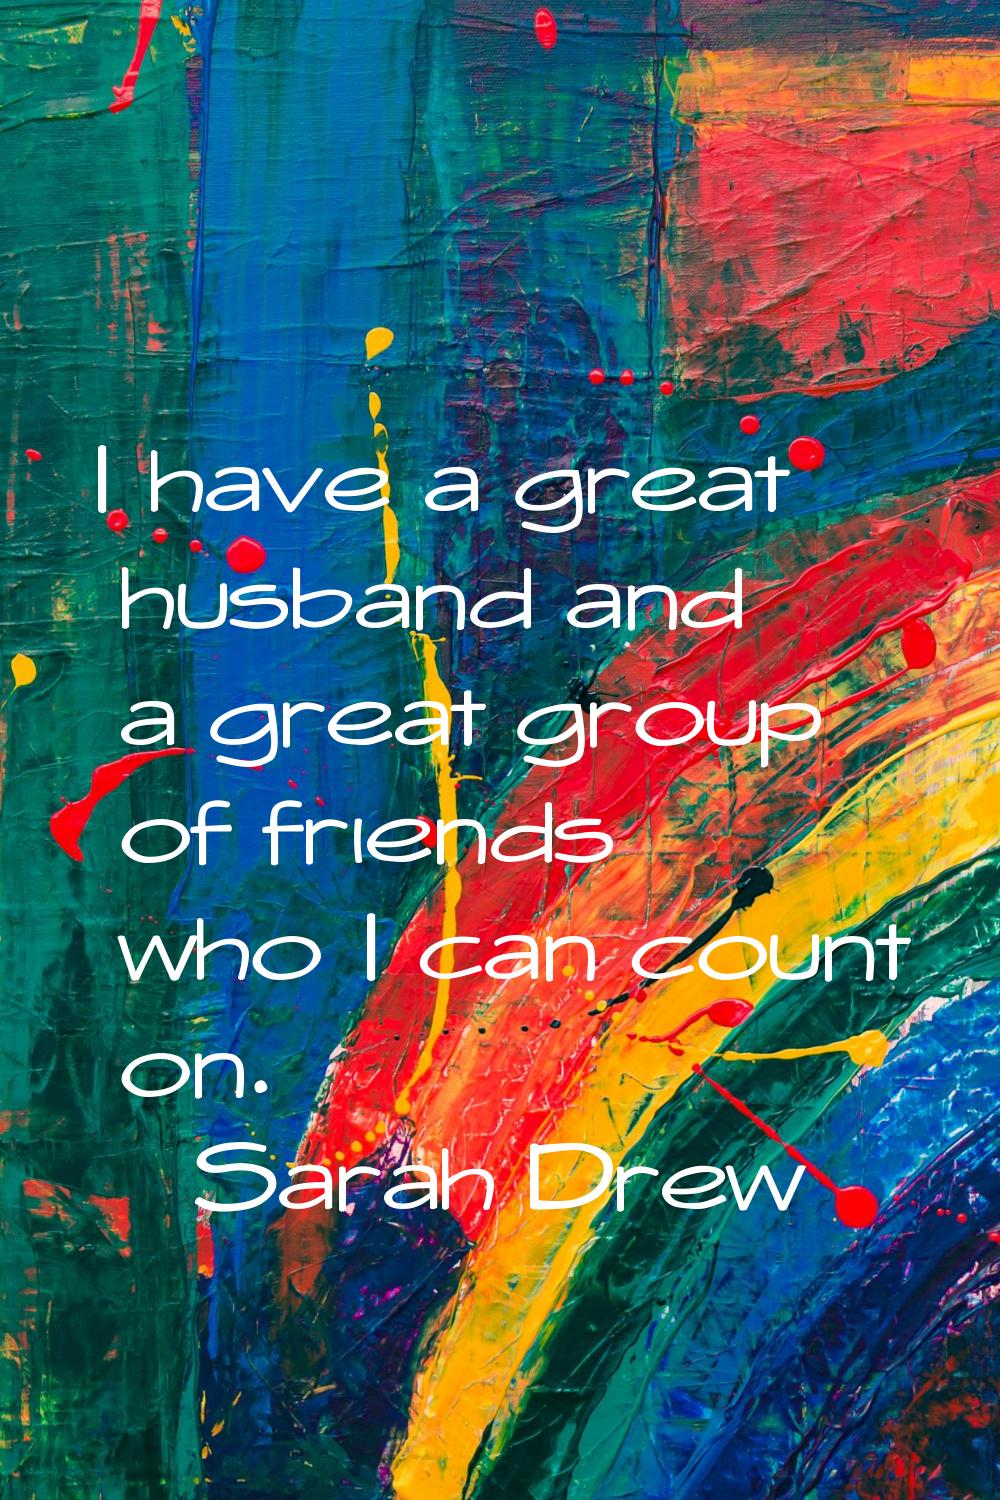 I have a great husband and a great group of friends who I can count on.